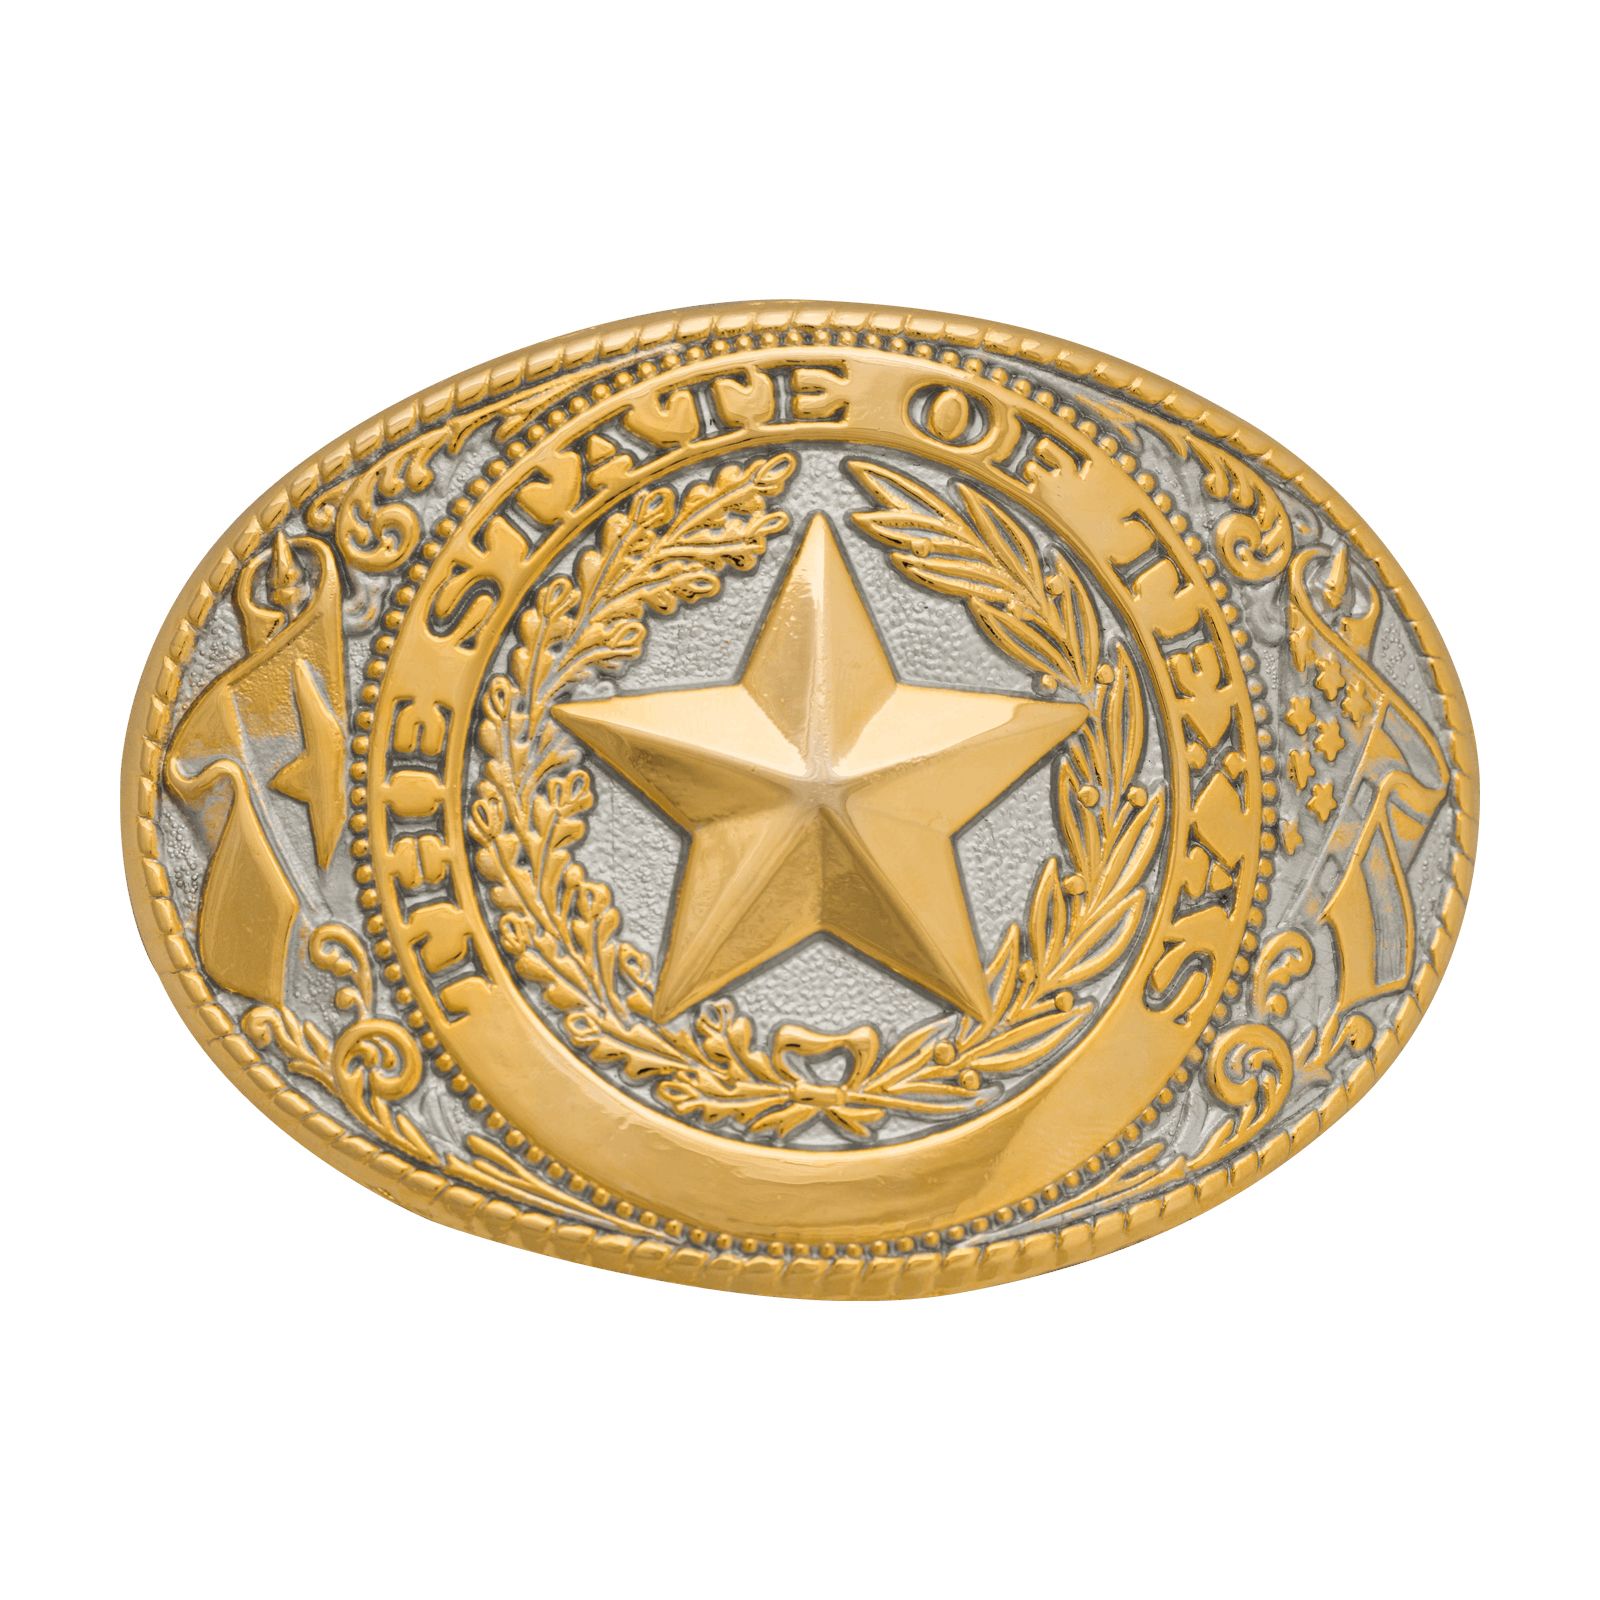 Texas State Seal Gold and Silver Tone Belt Buckle | Texas Capitol Gift Shop